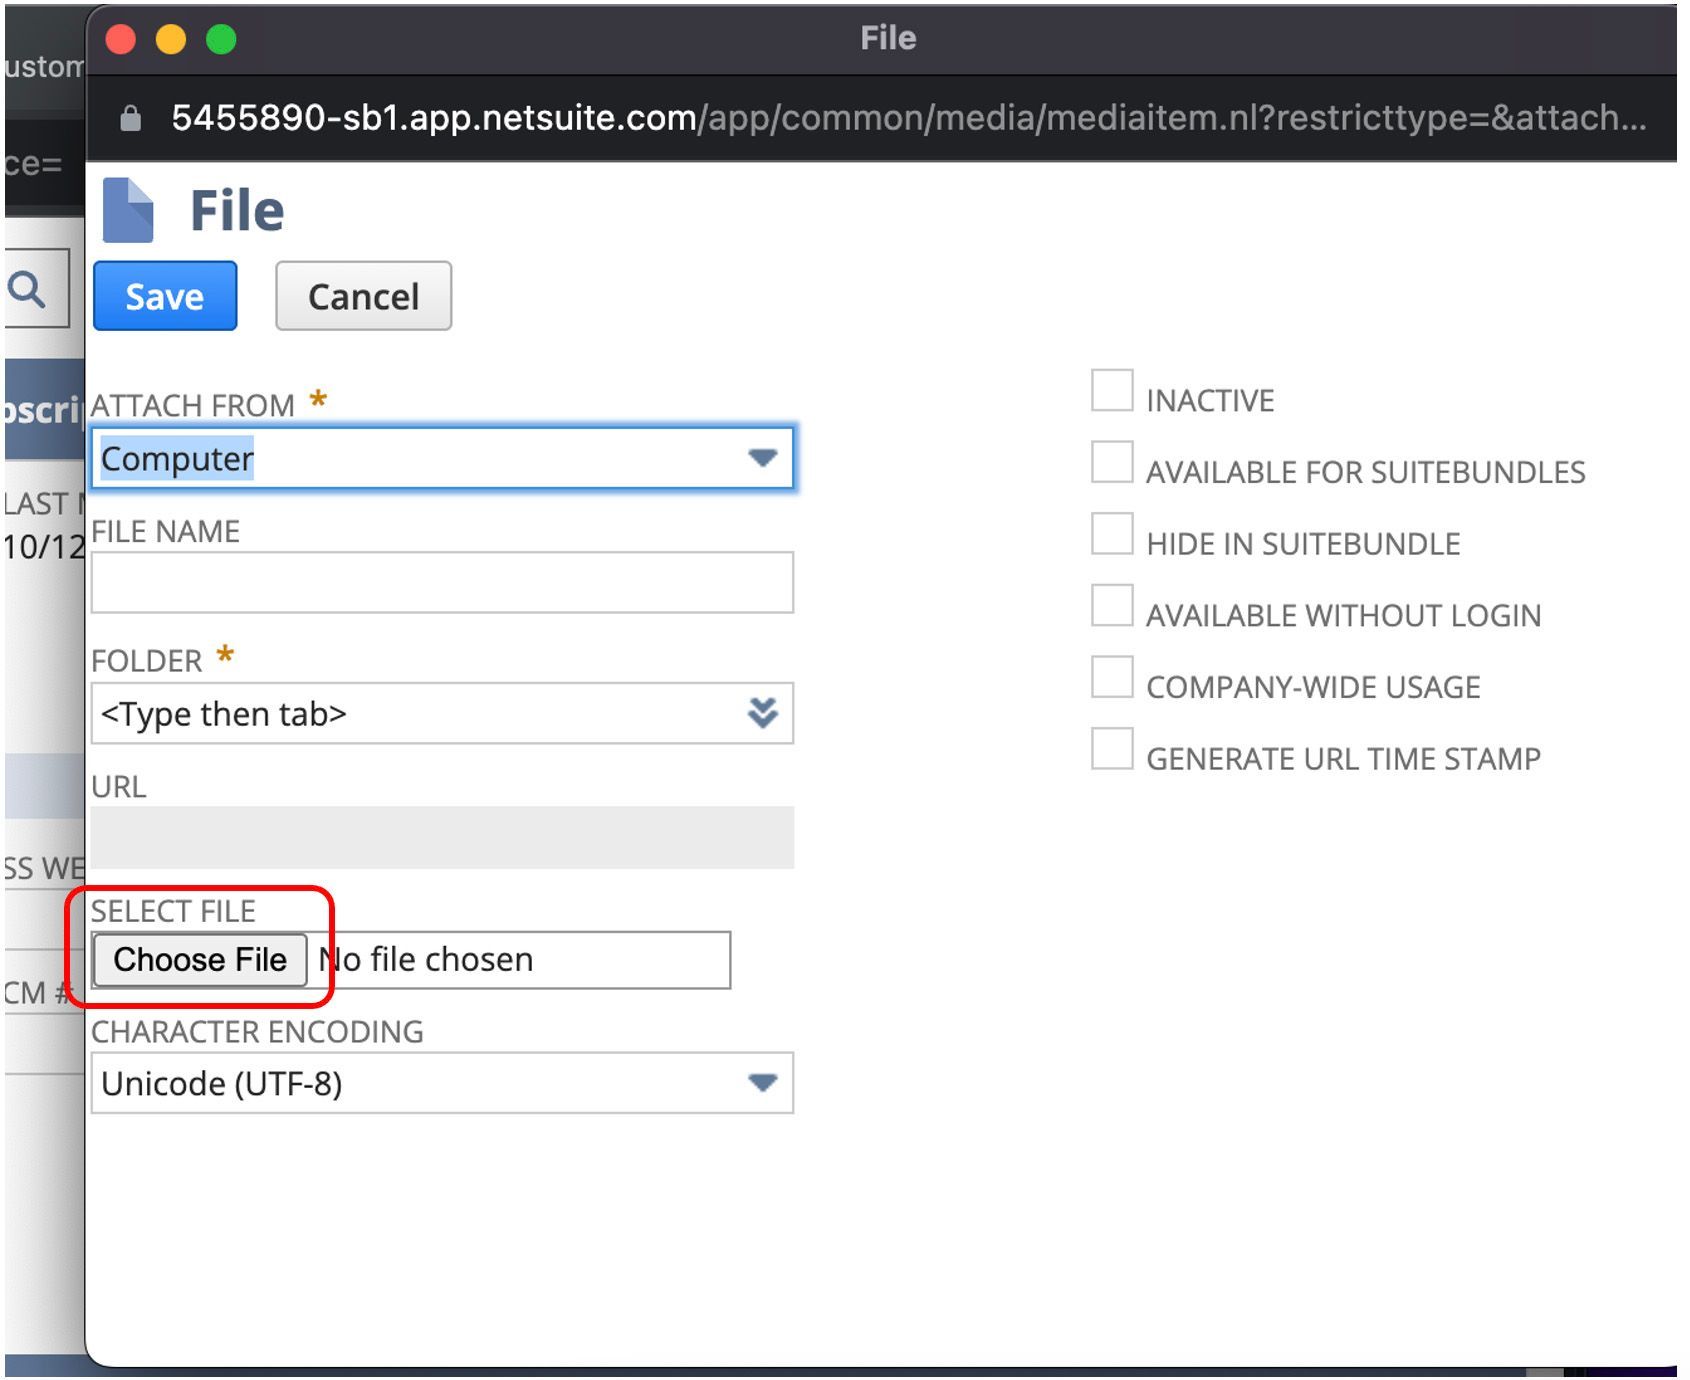 This is the fourteenth screenshot showing how to create a customer record in NetSuite.